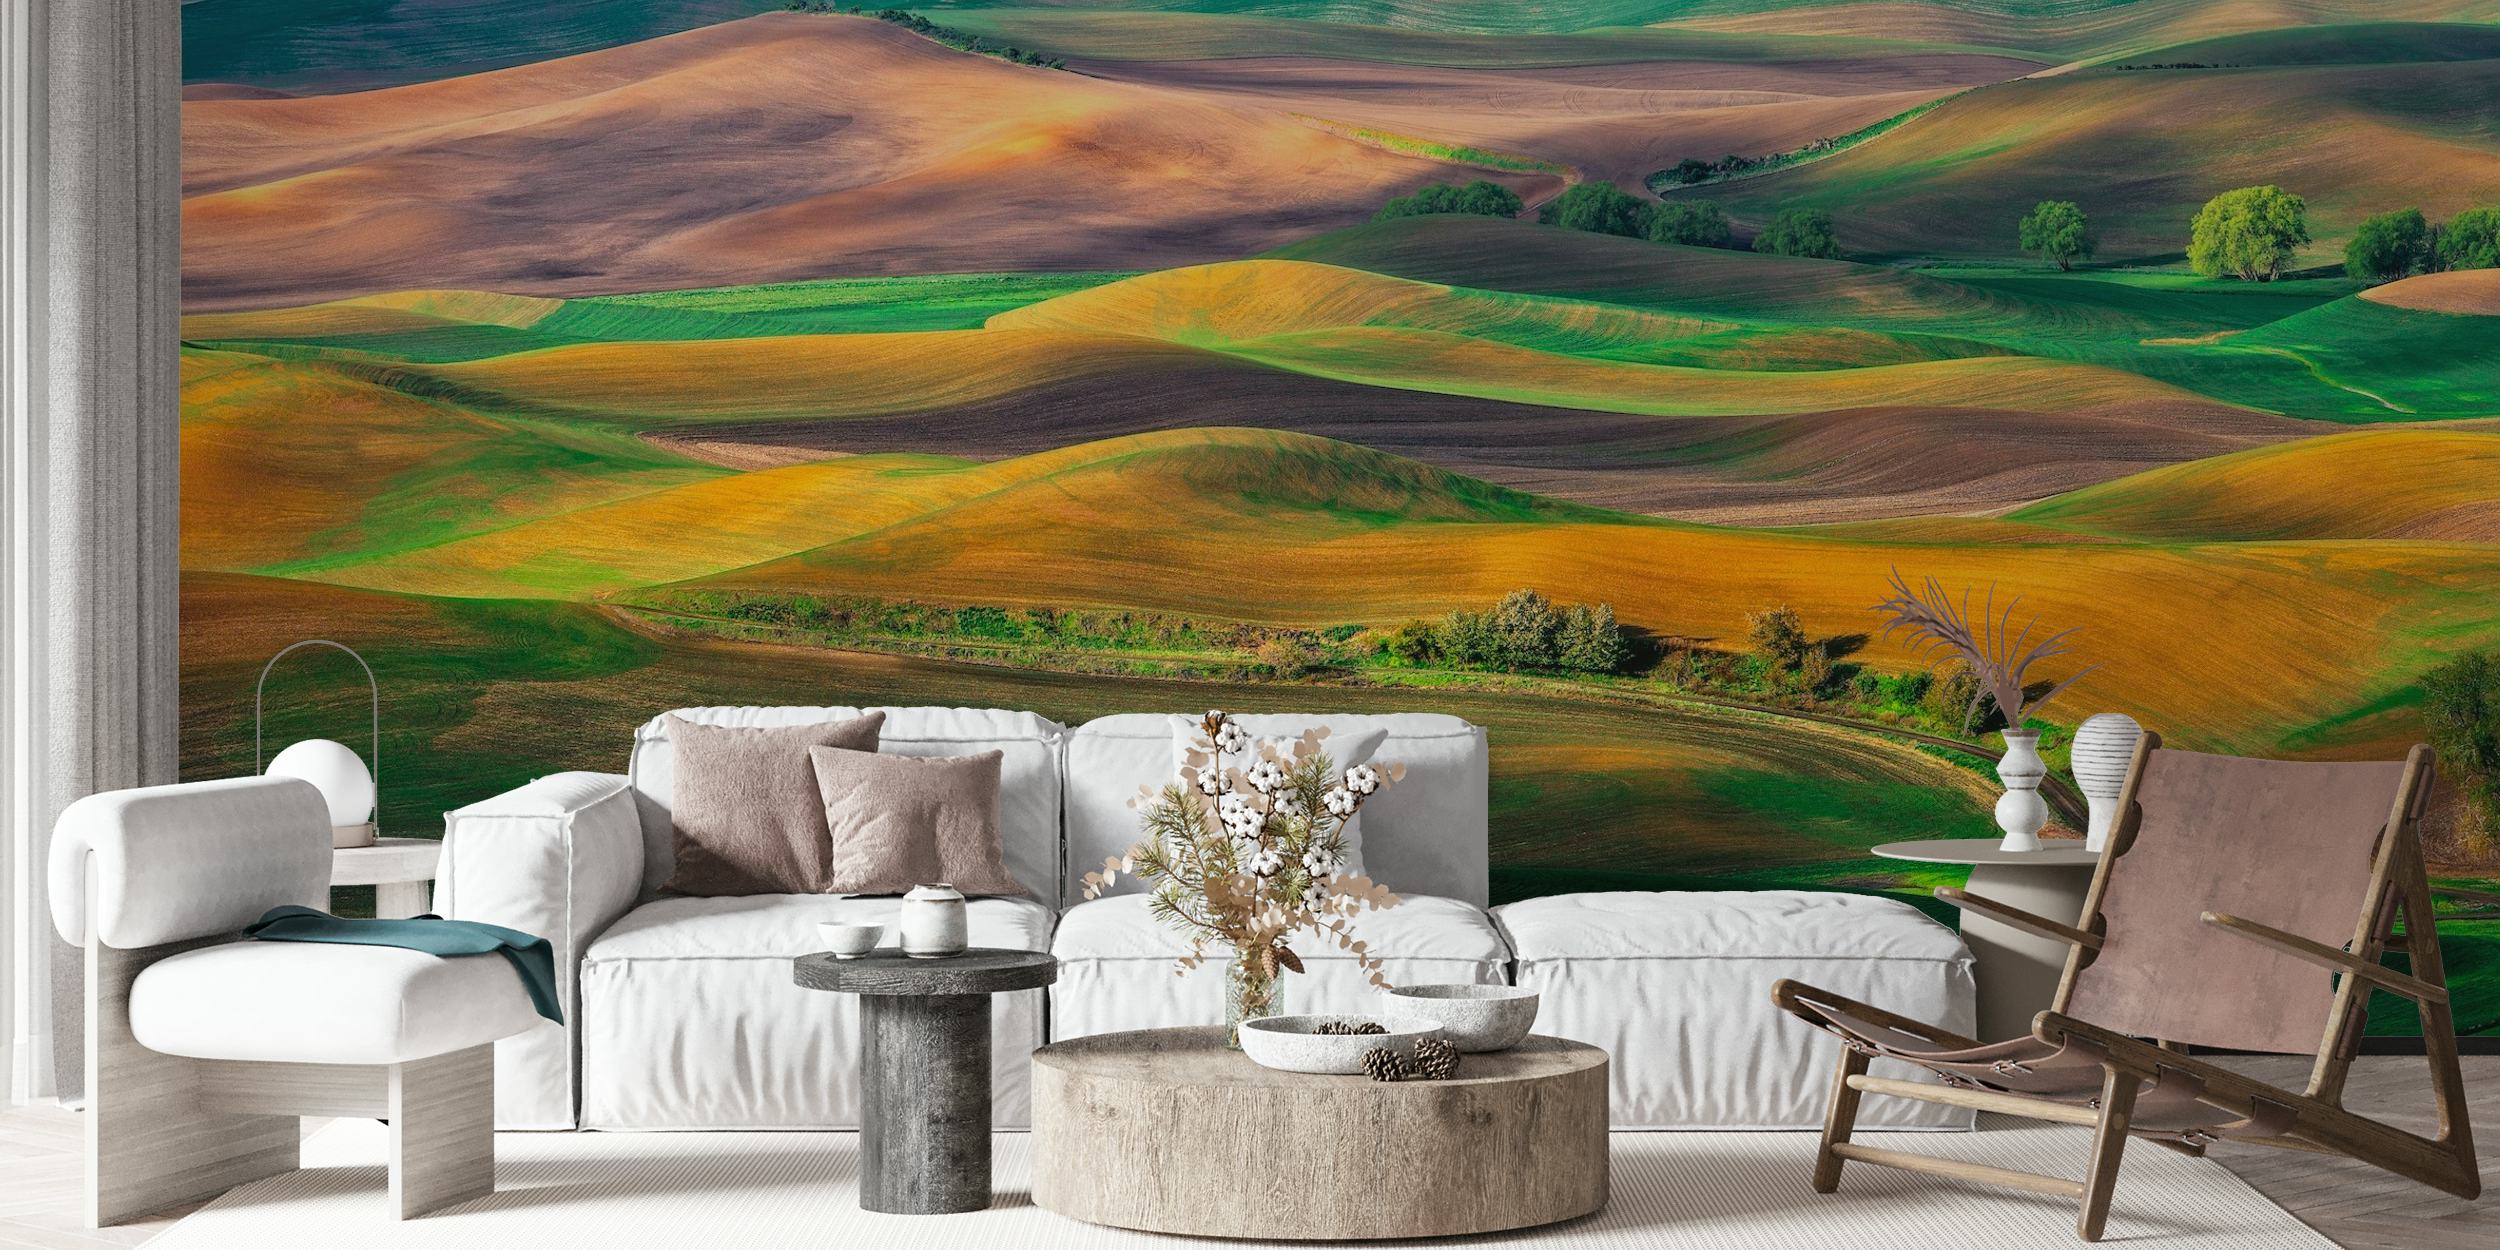 Rolling hills of The Palouse wall mural depicting a serene landscape